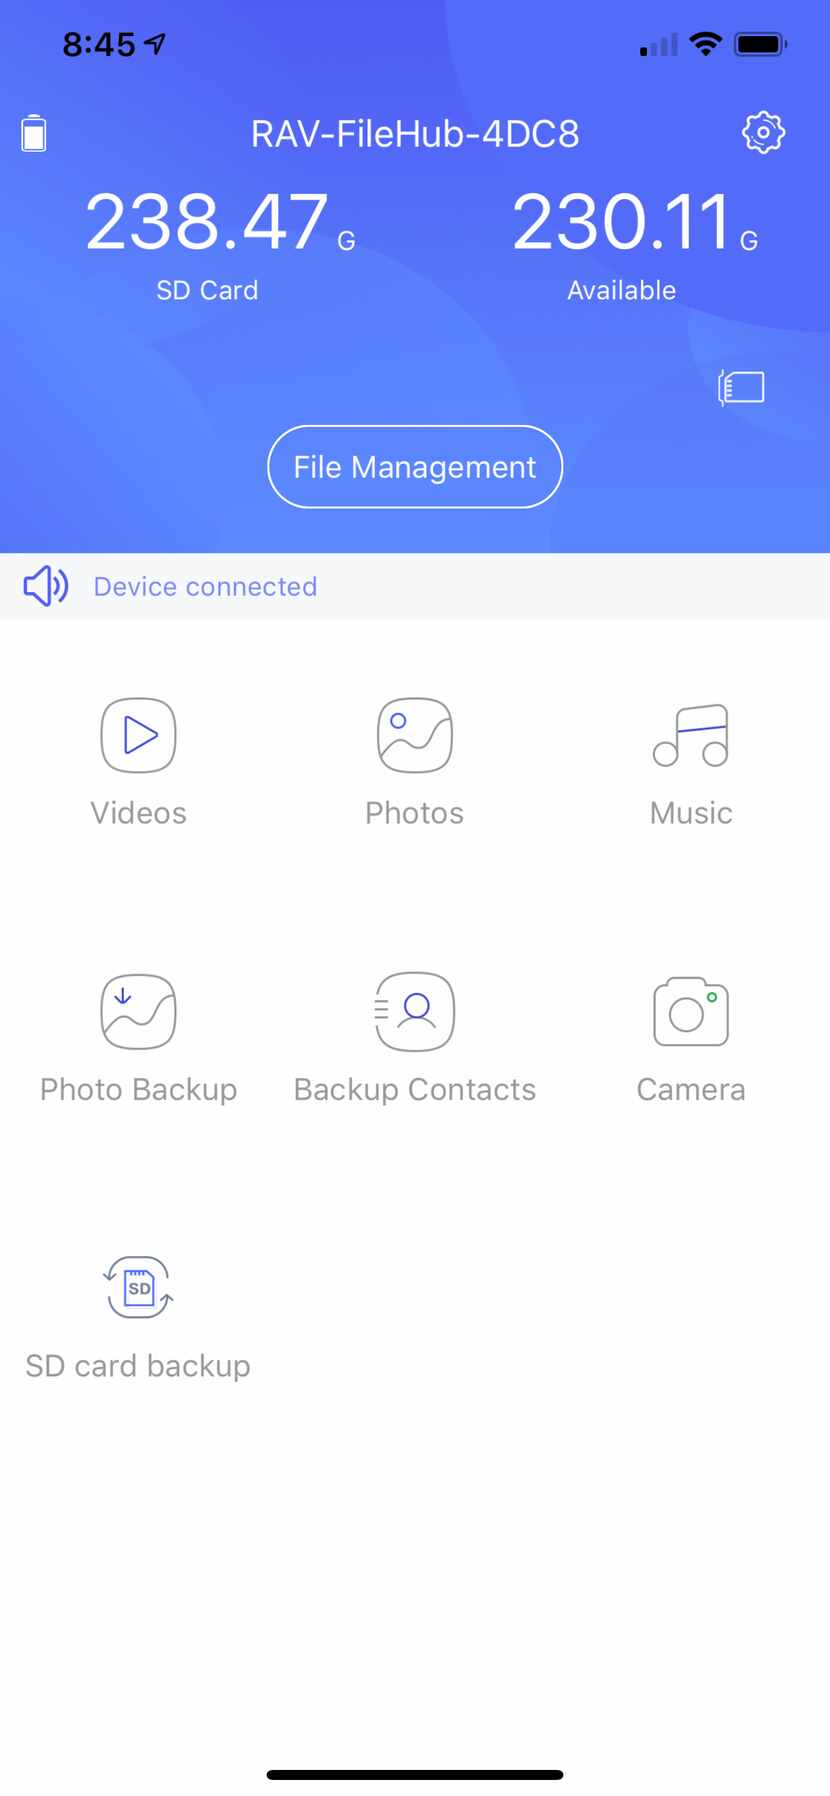 The main screen of the Filehub app on iPhone